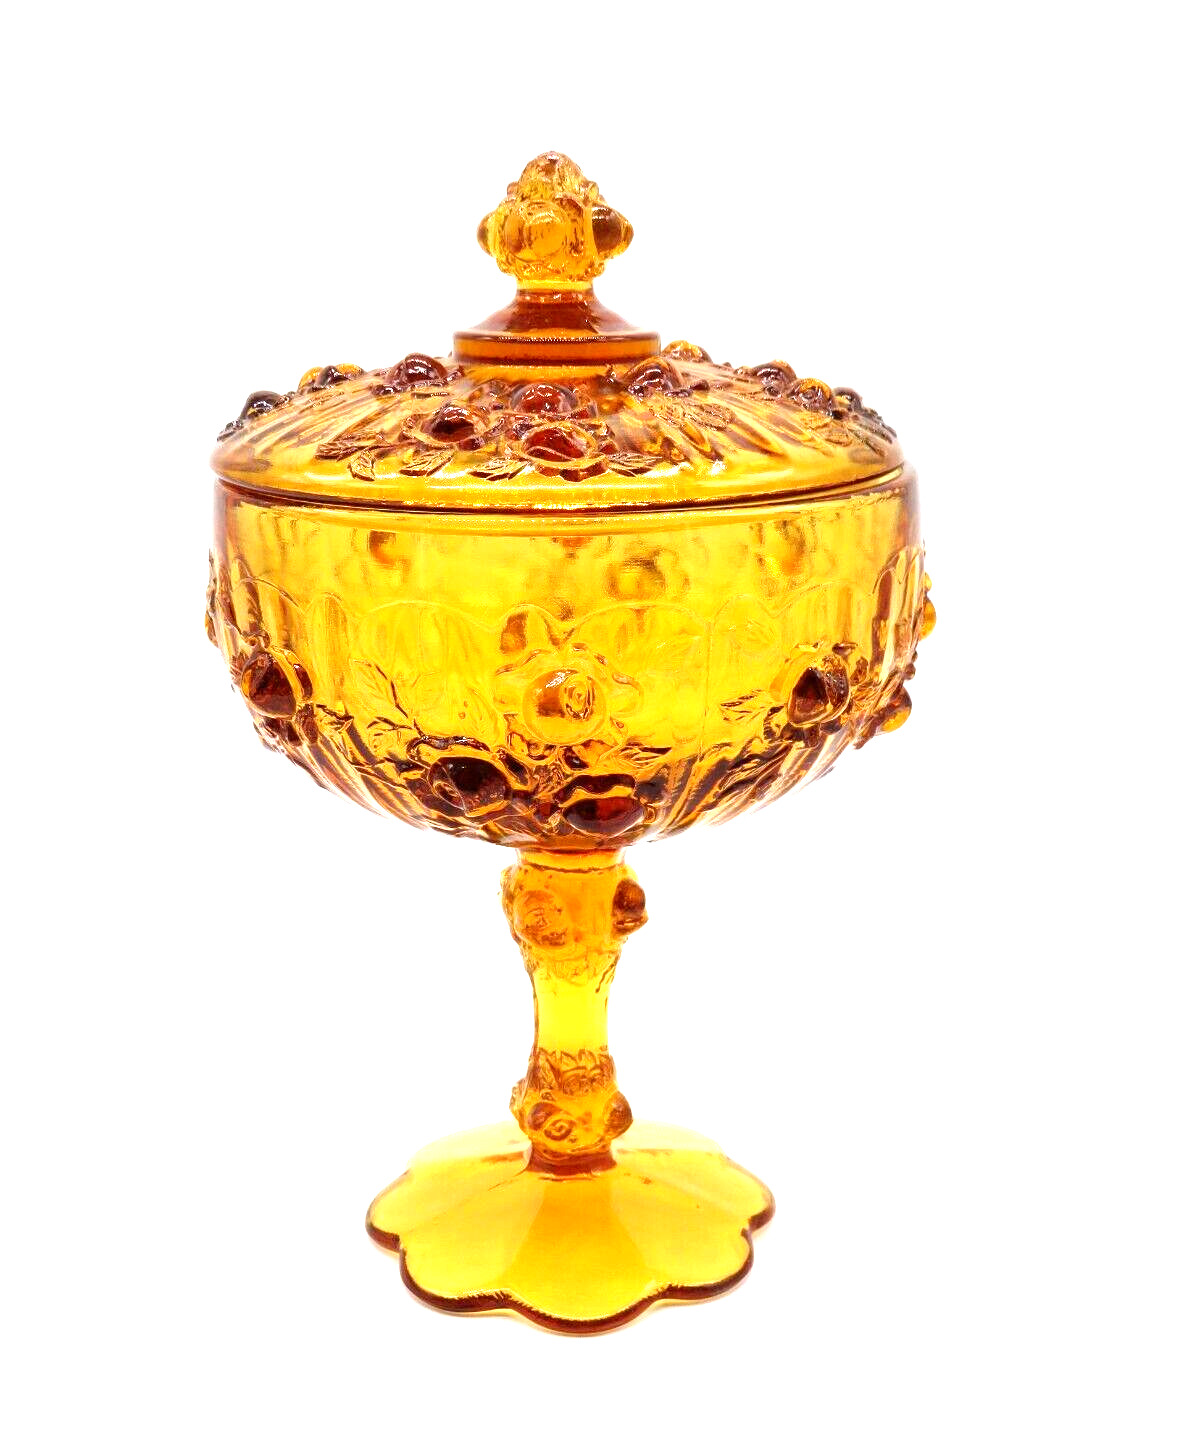 VTG Fenton Pedestal Covered Candy Dish In amber glass Cabbage Rose pattern